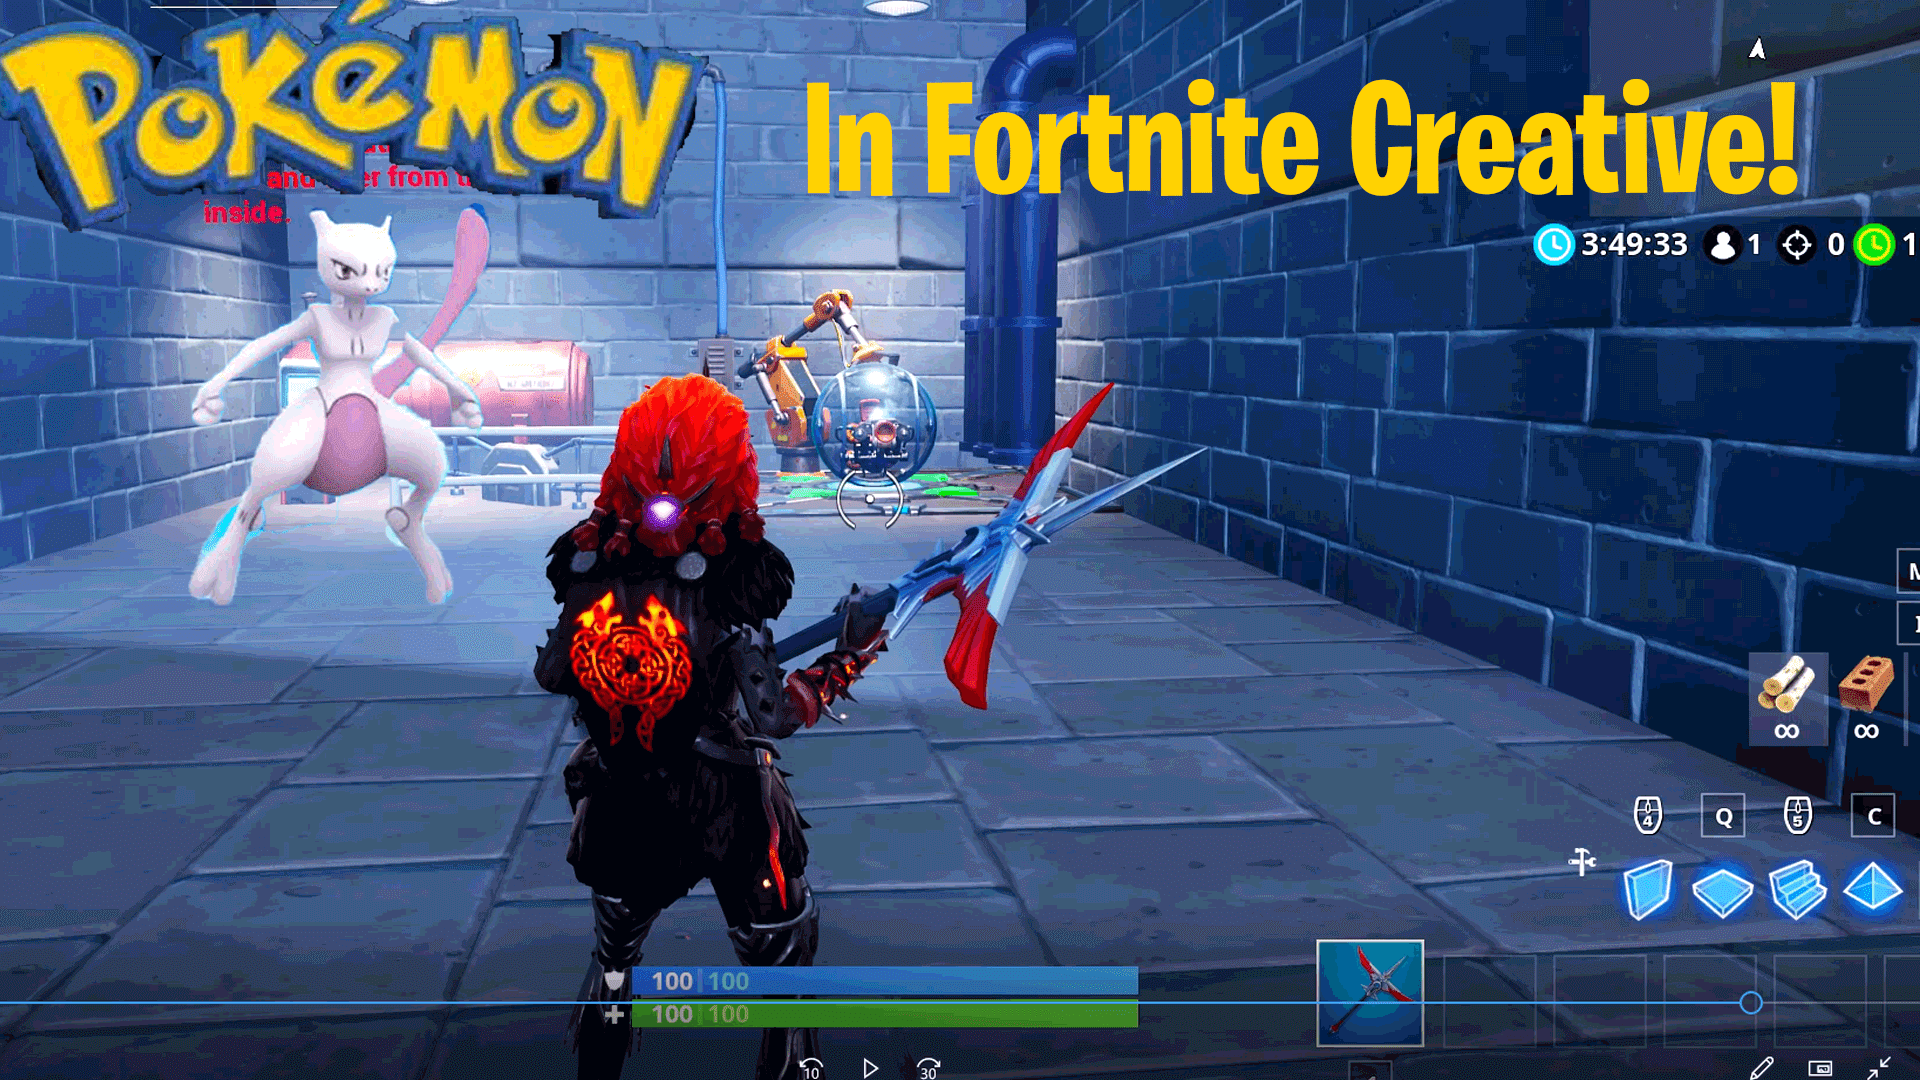 This includes recommended deathmatches, aim training, prop hunt, hide and seek, and death run creative islands, as well as how to use creative codes! Pokemon Lets Go Fortnite Fortnite Creative Map Codes Dropnite Com